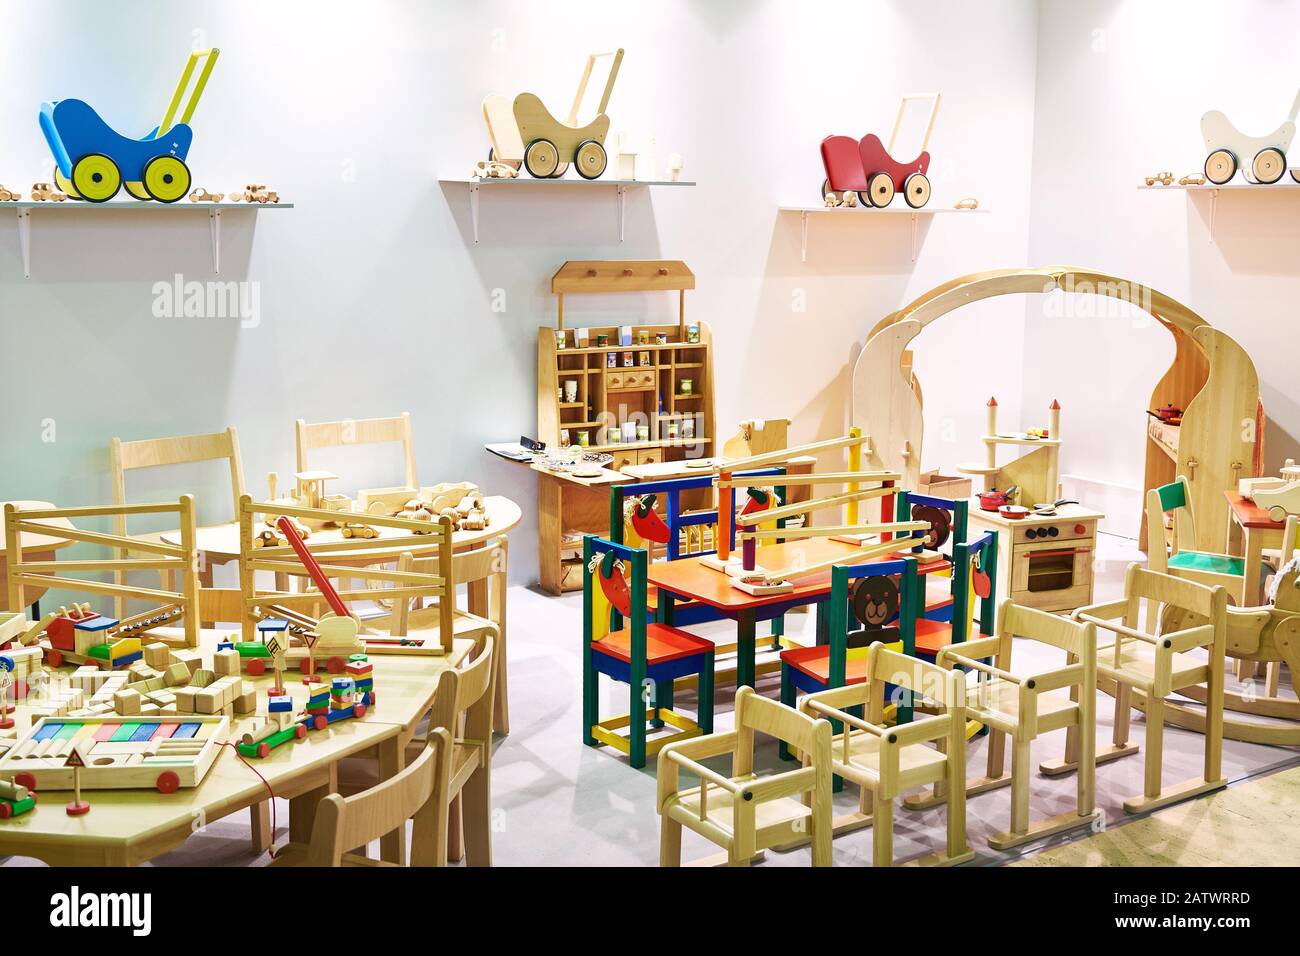 Children wooden furniture and toys in the store Stock Photo